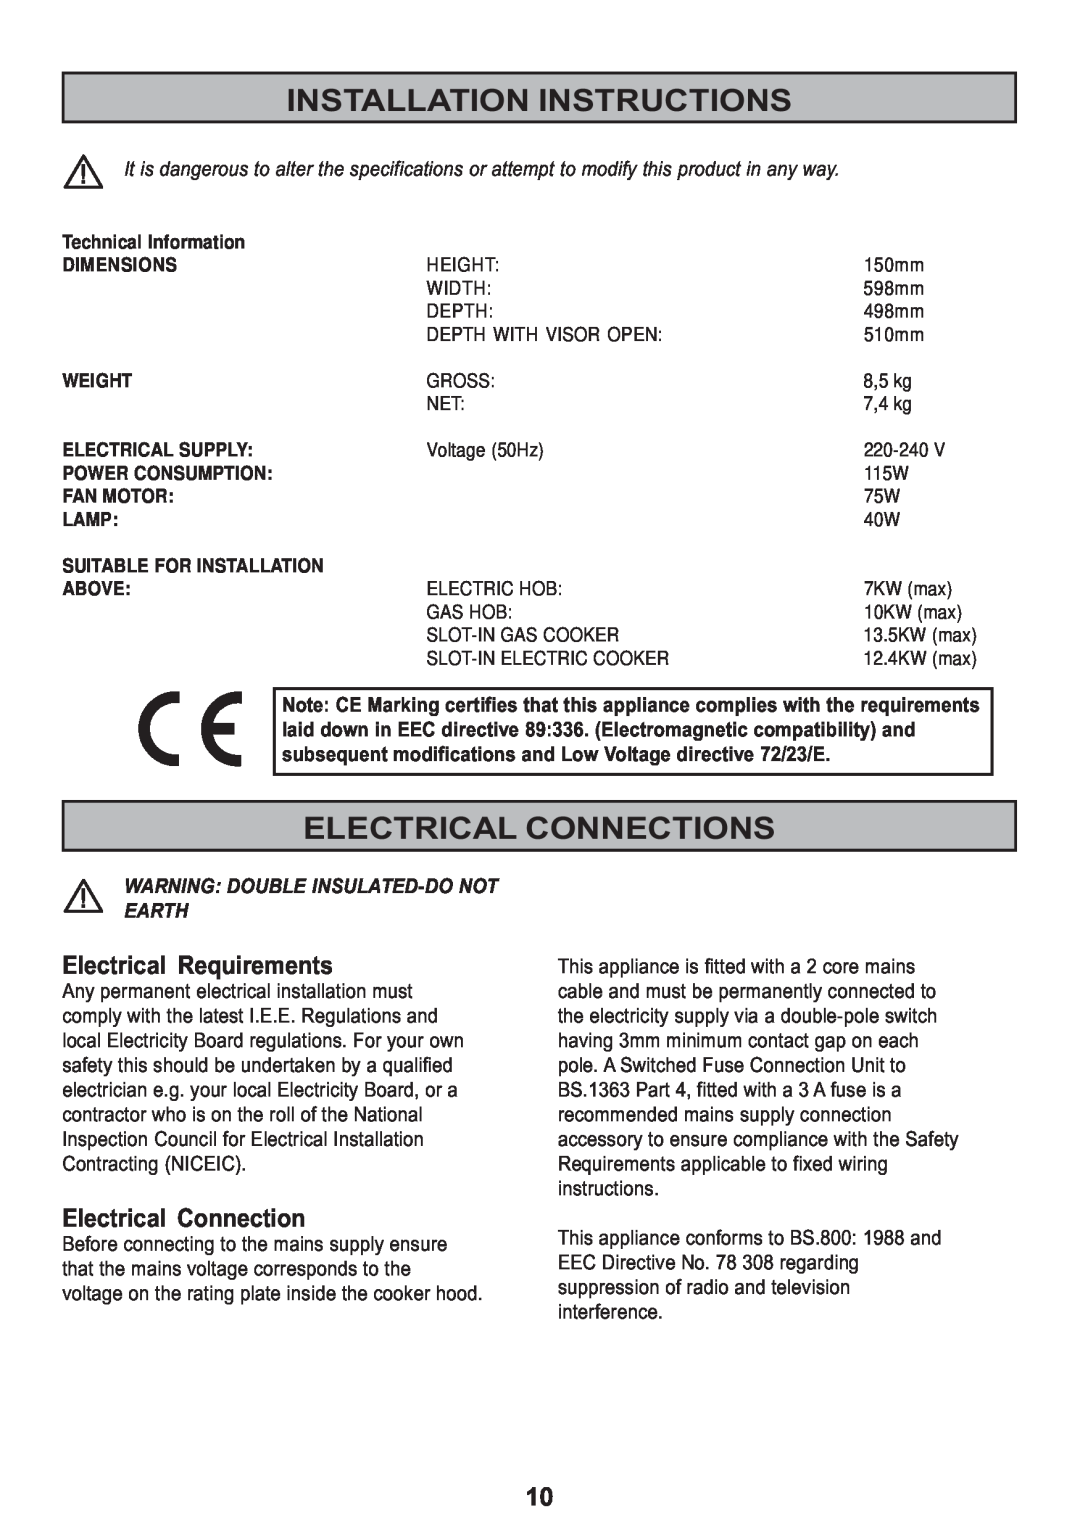 Electrolux MCH 660 manual Installation Instructions, Electrical Connections, Electrical Requirements 